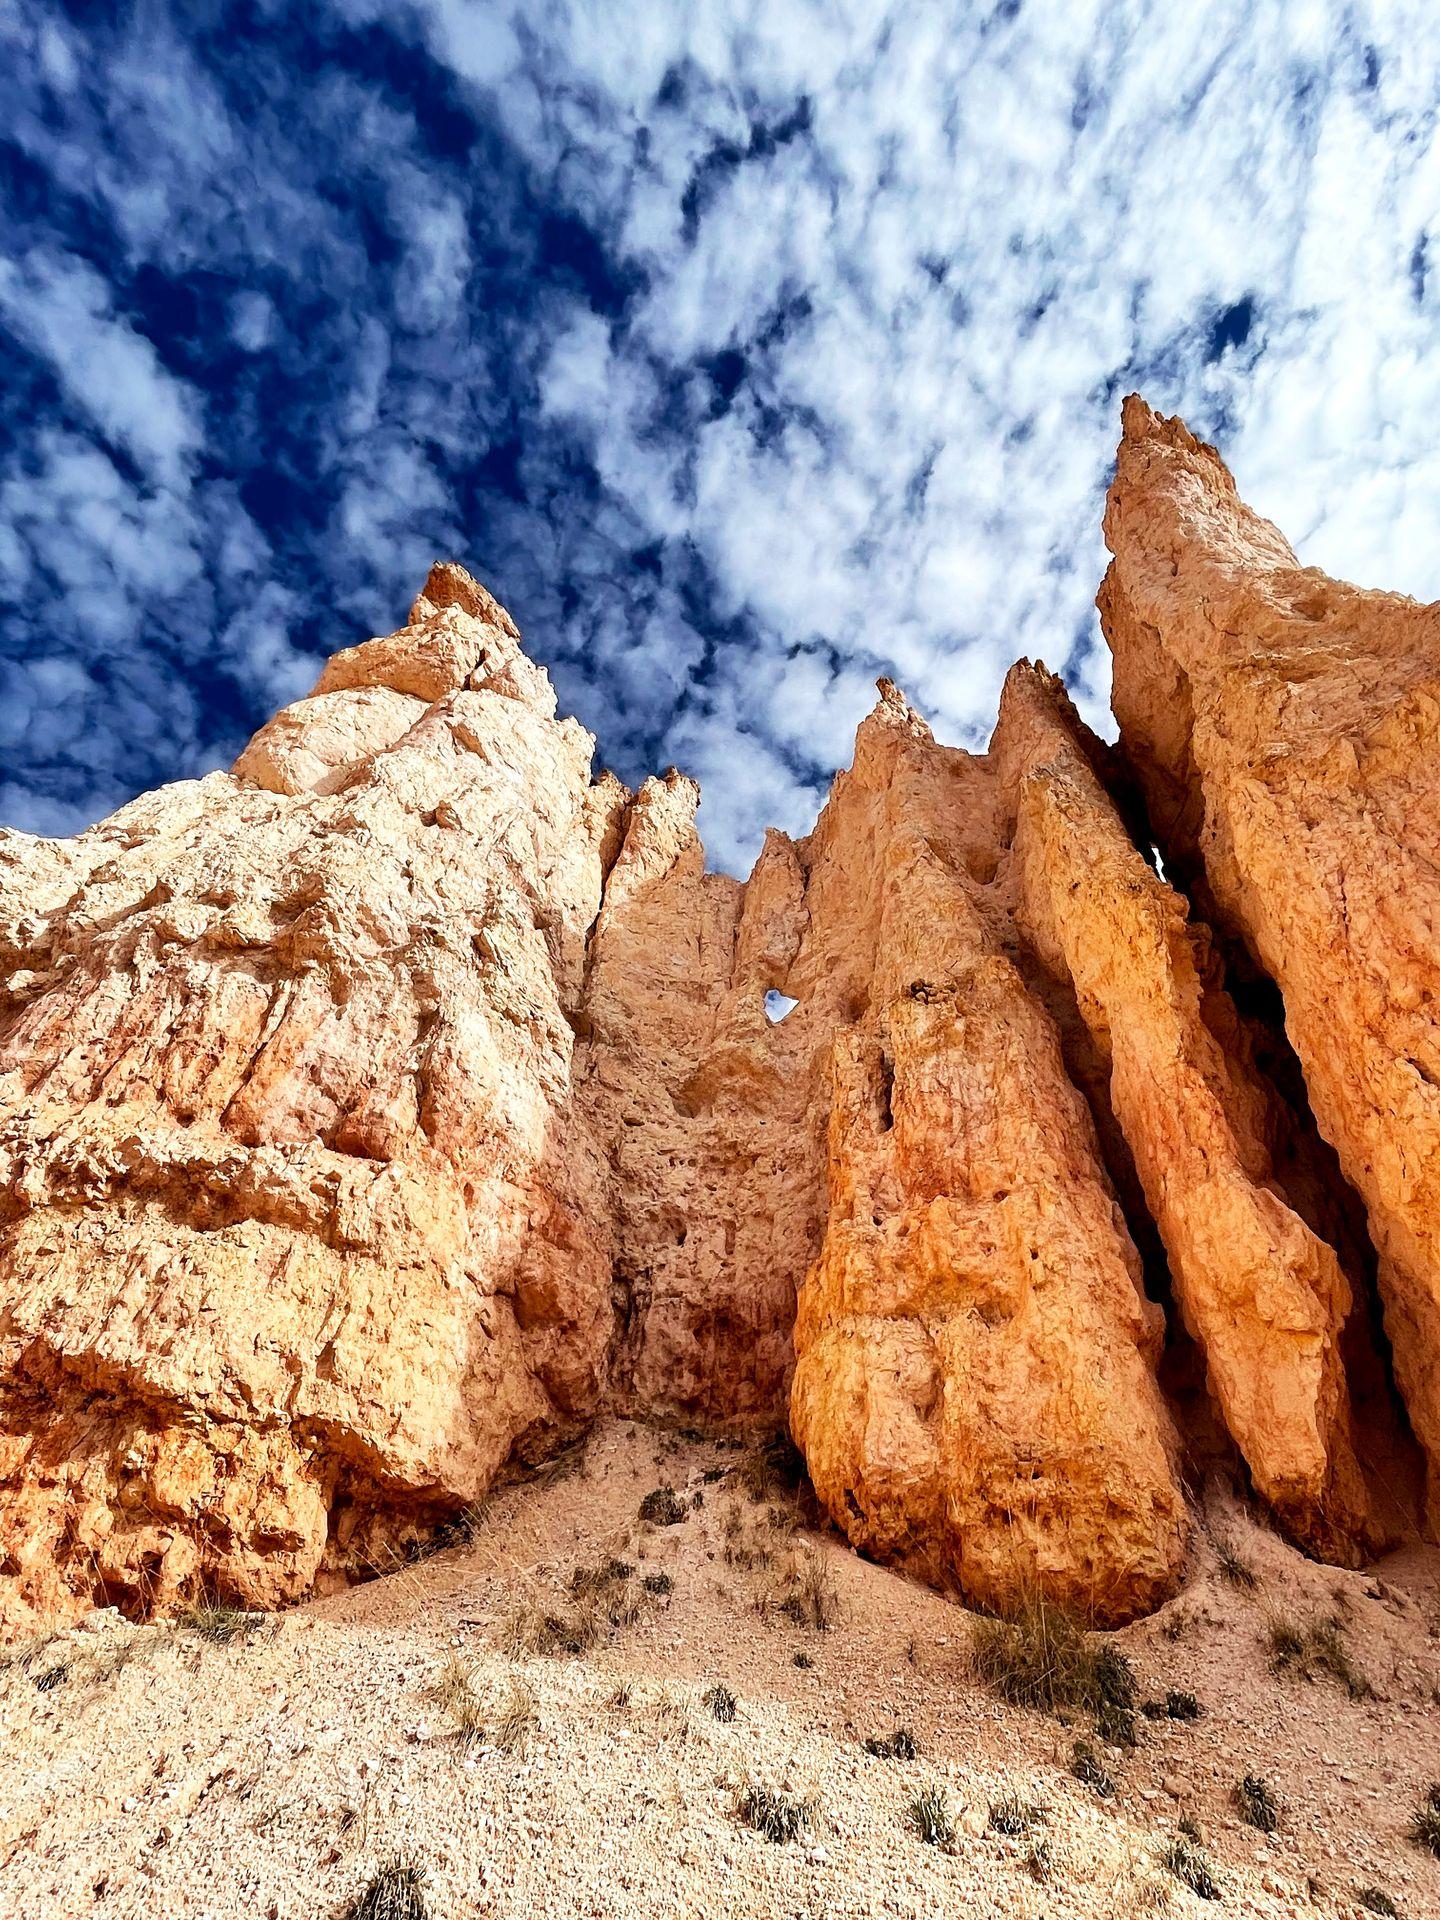 Looking up at hoodoo rock formations with a blue sky above them.